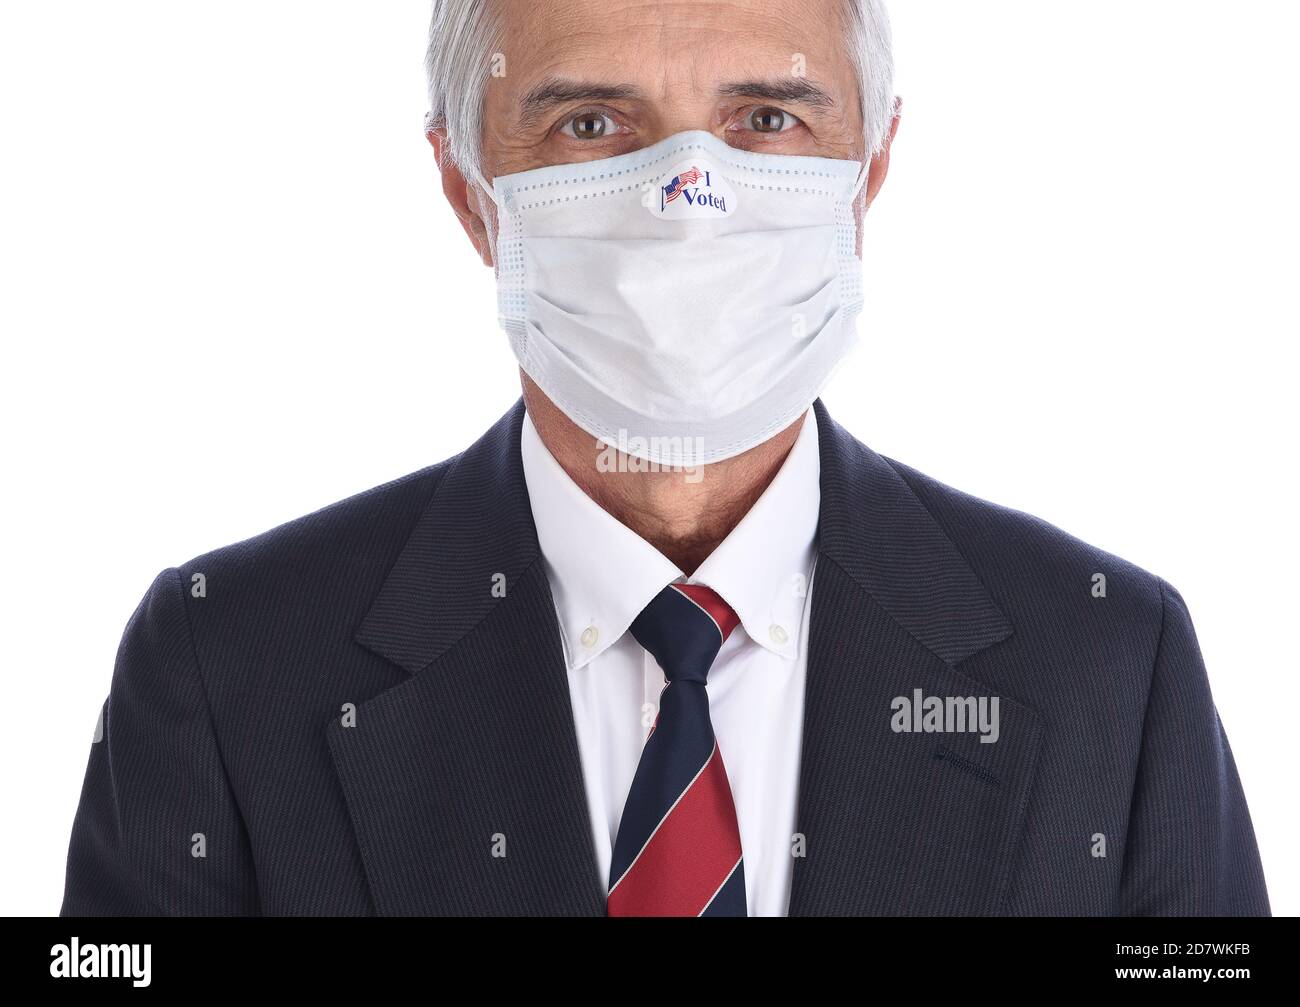 Closeup of a businessman with an I Voted sticker on the COVID-19 protective mask he wore to vote. Stock Photo